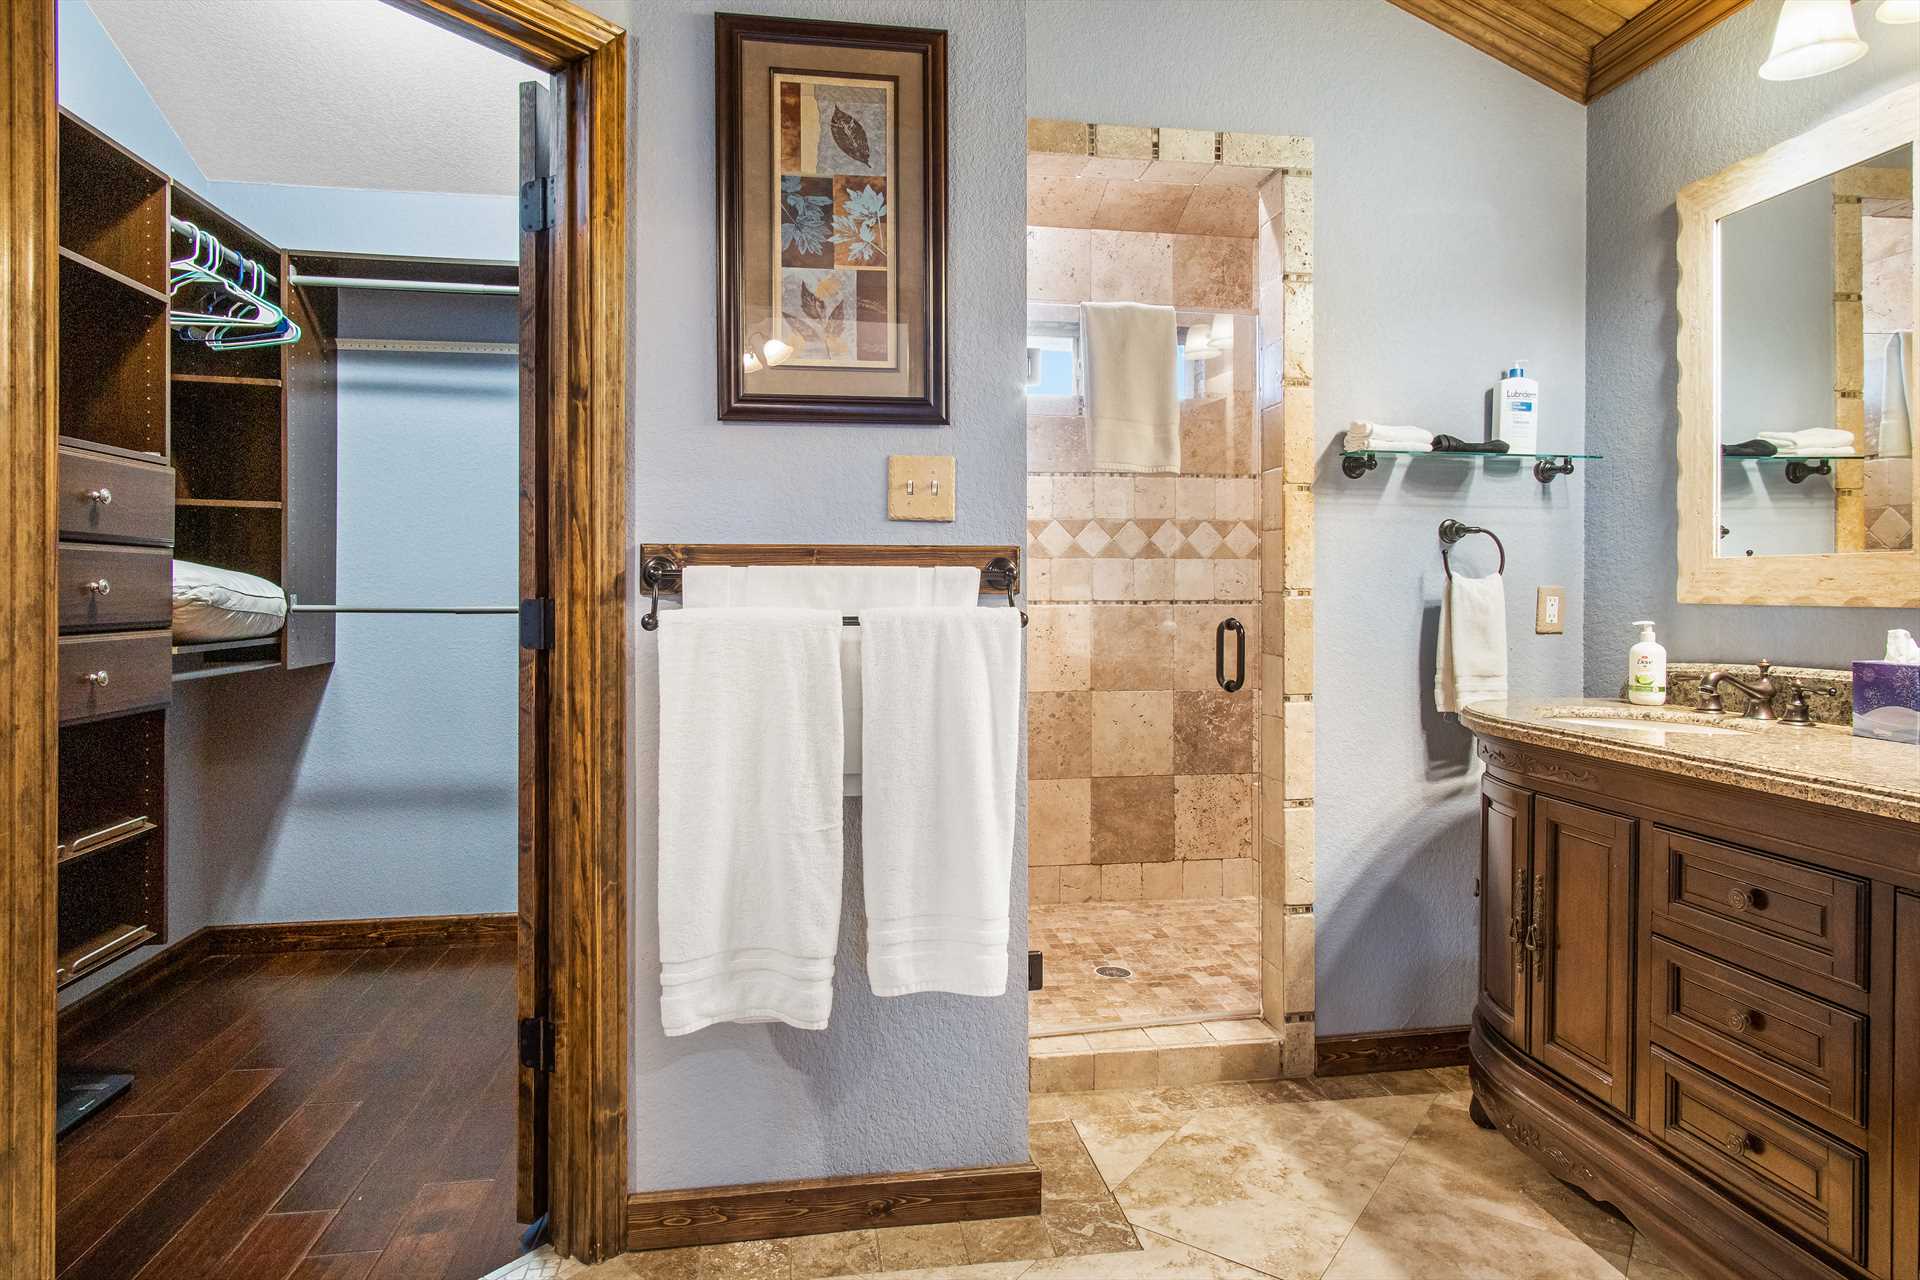                                                 The three full bathrooms at the Retreat are also fully supplied with all the linens your crew will need.